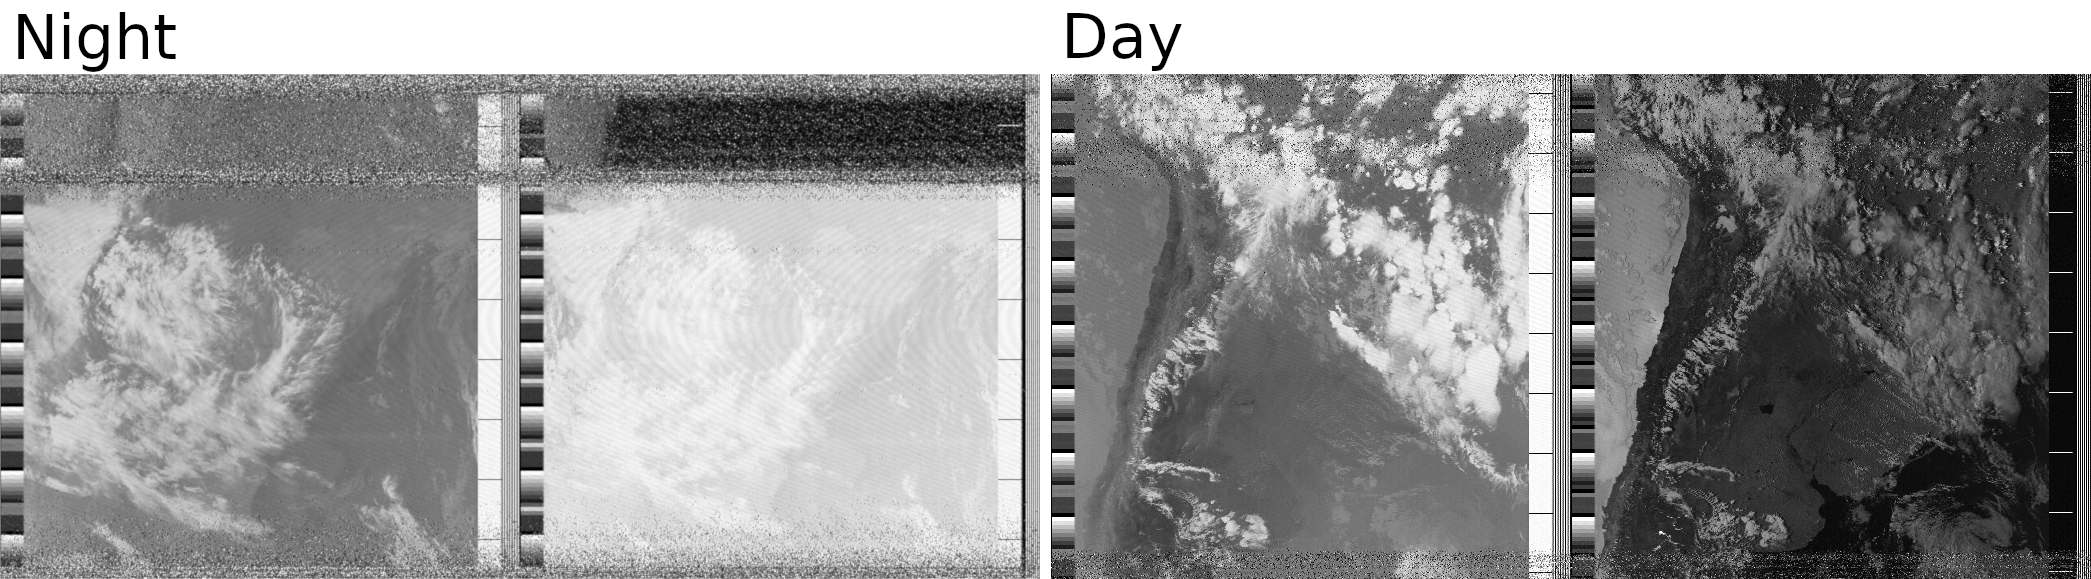 Comparison between night and day images